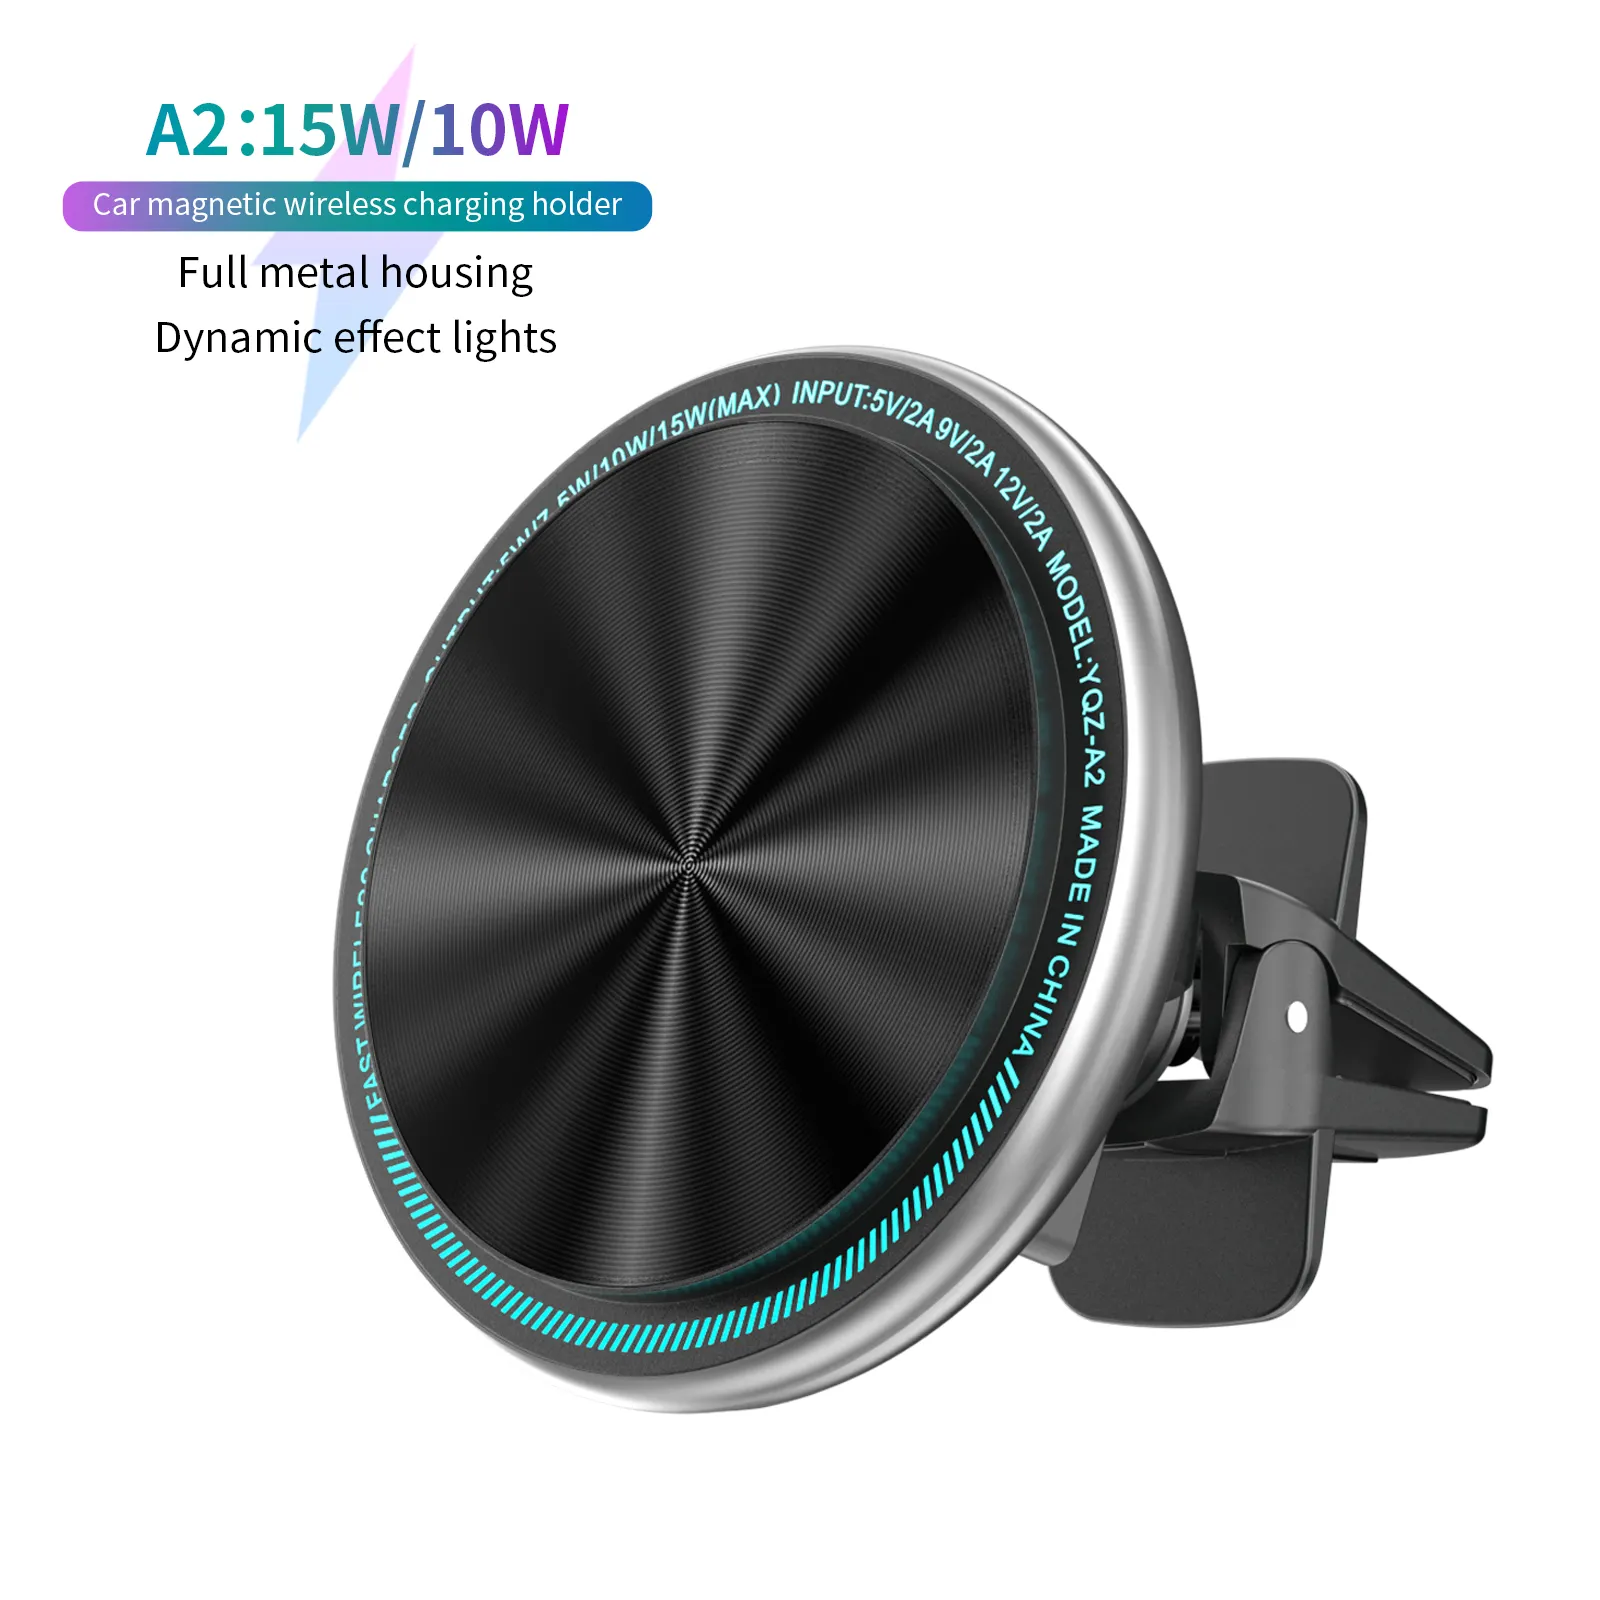 Magnetic car wireless charger mobile phone holder 15W A2 the newest wireless car phone mount